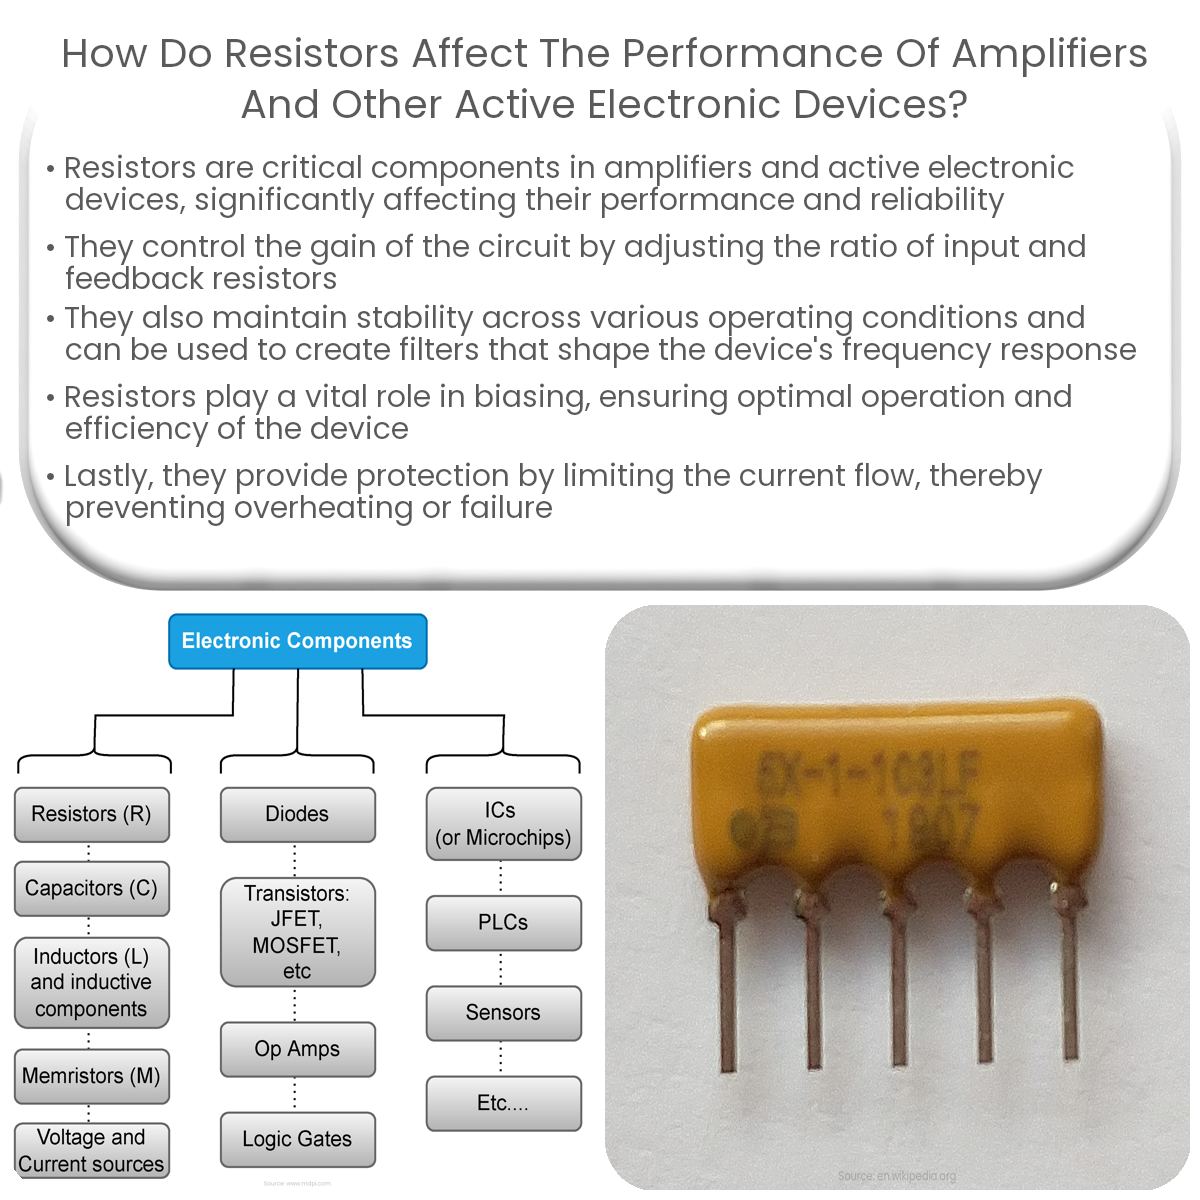 How do resistors affect the performance of amplifiers and other active electronic devices?